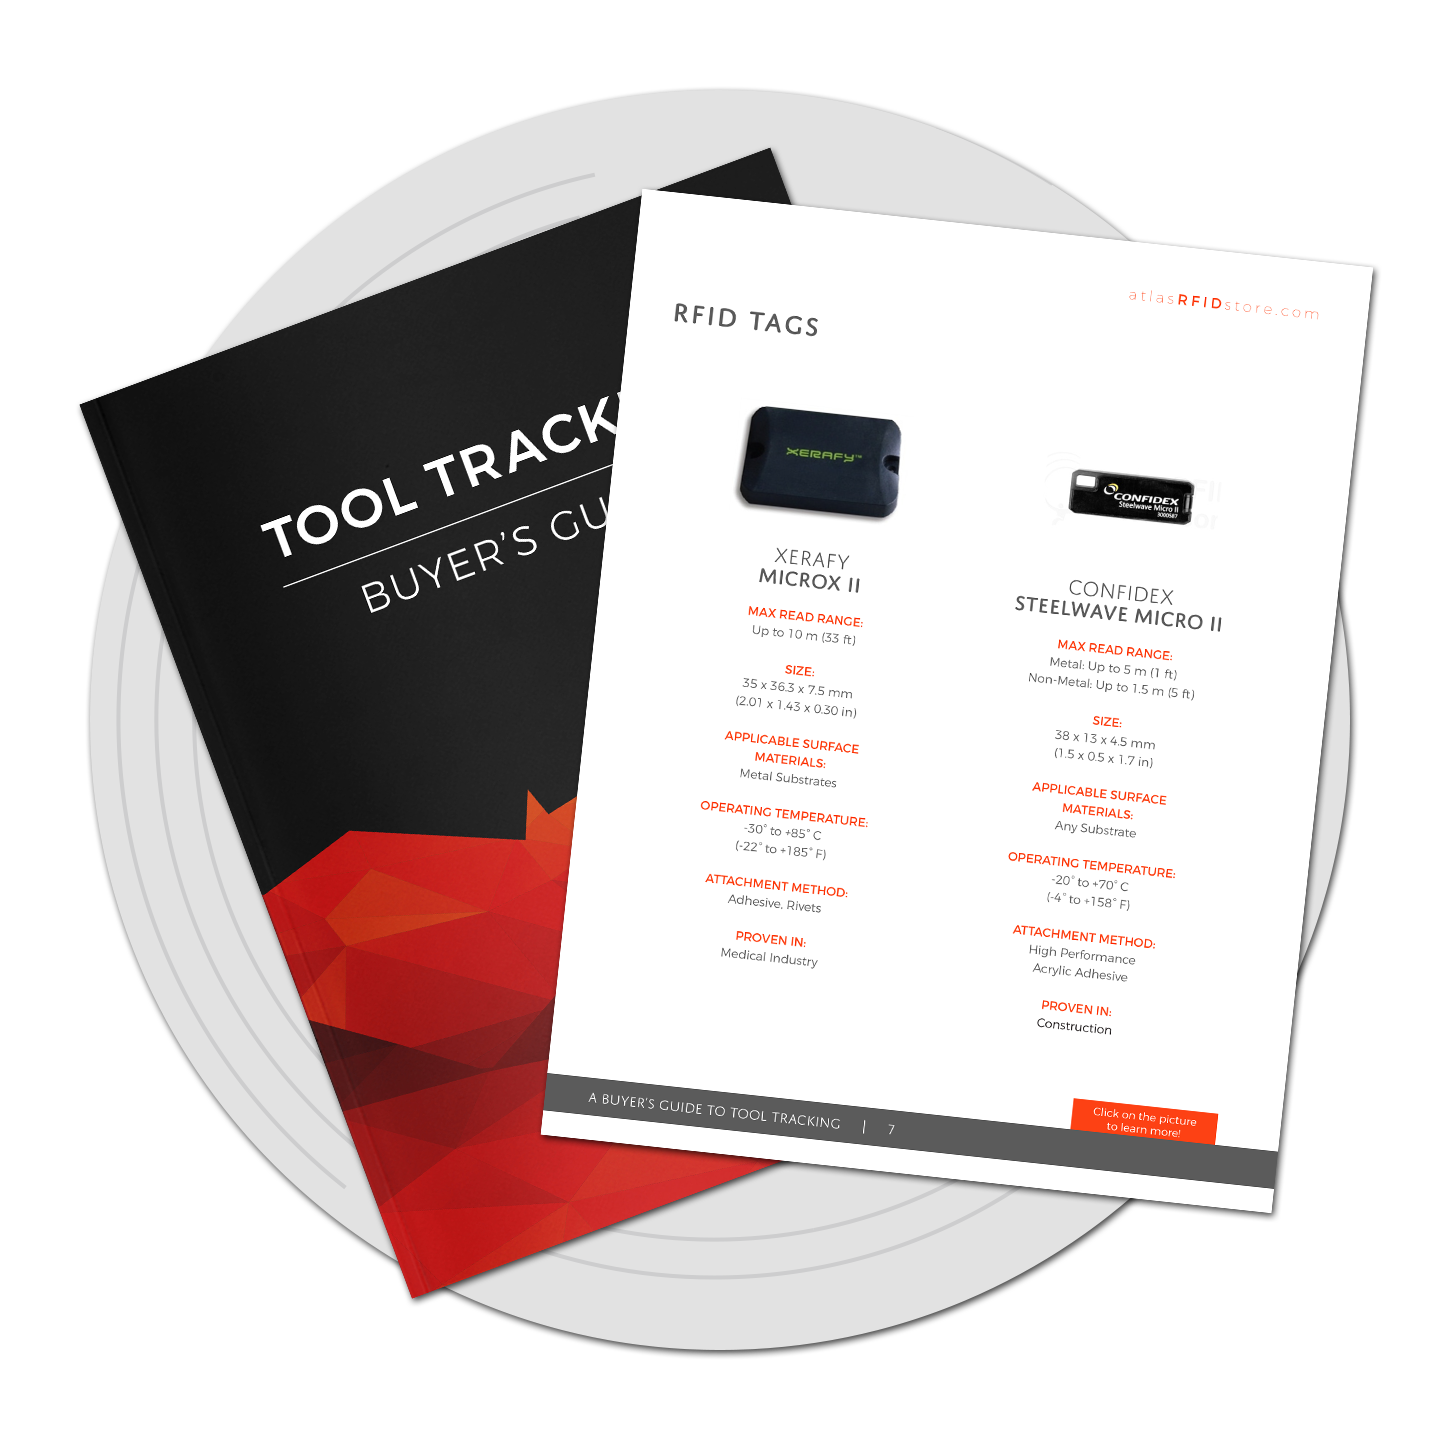 RFID Tool Tracking Guide